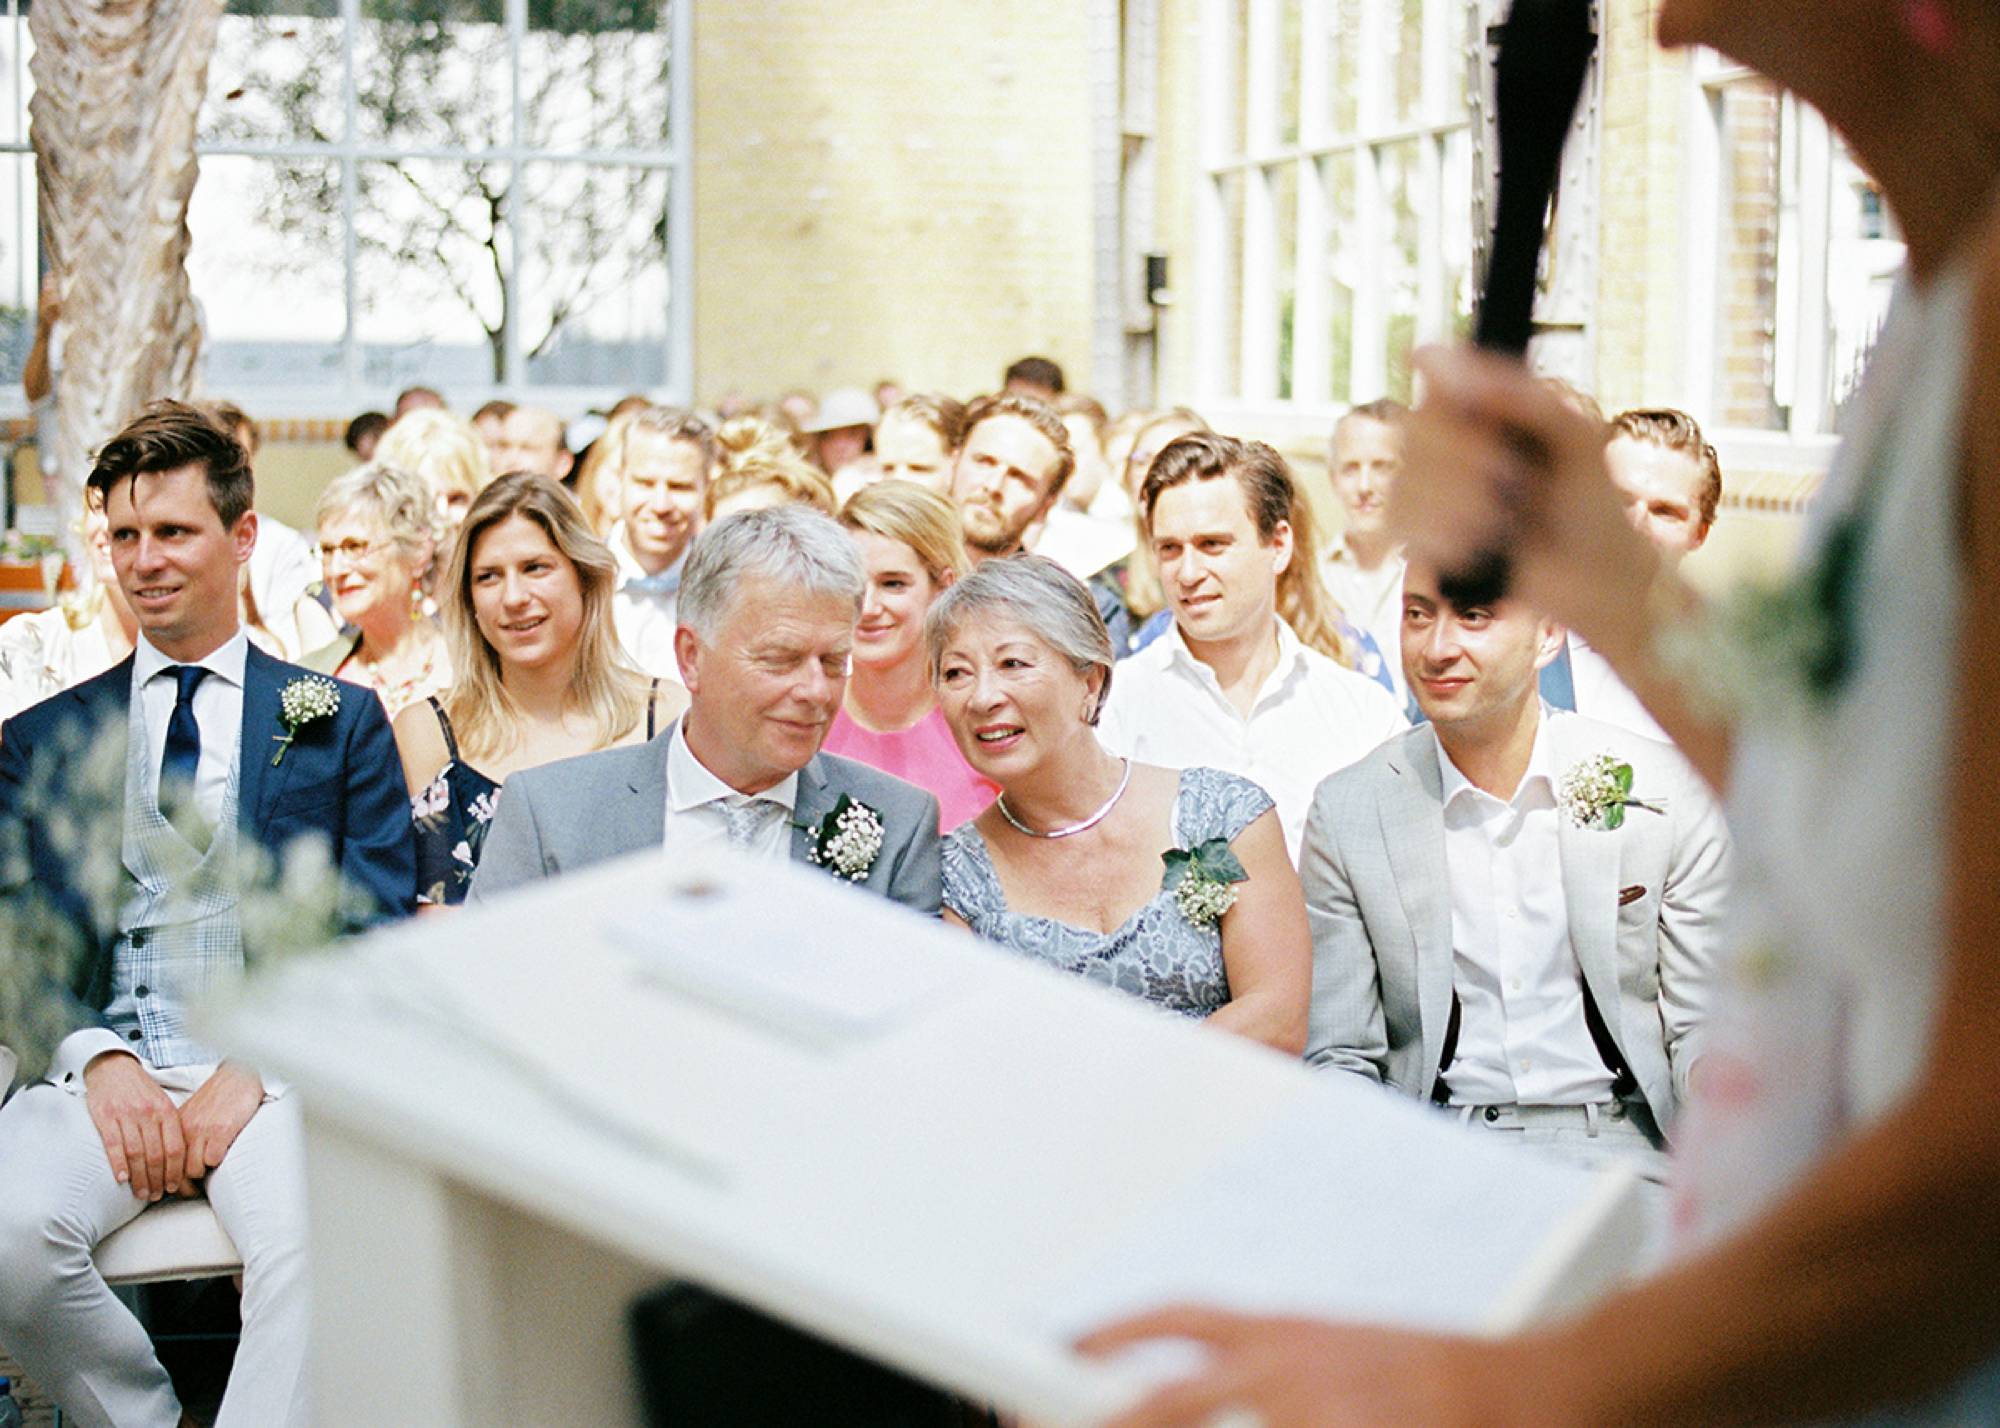 Fine art film photography Amsterdam the Netherlands - Guests at the ceremony